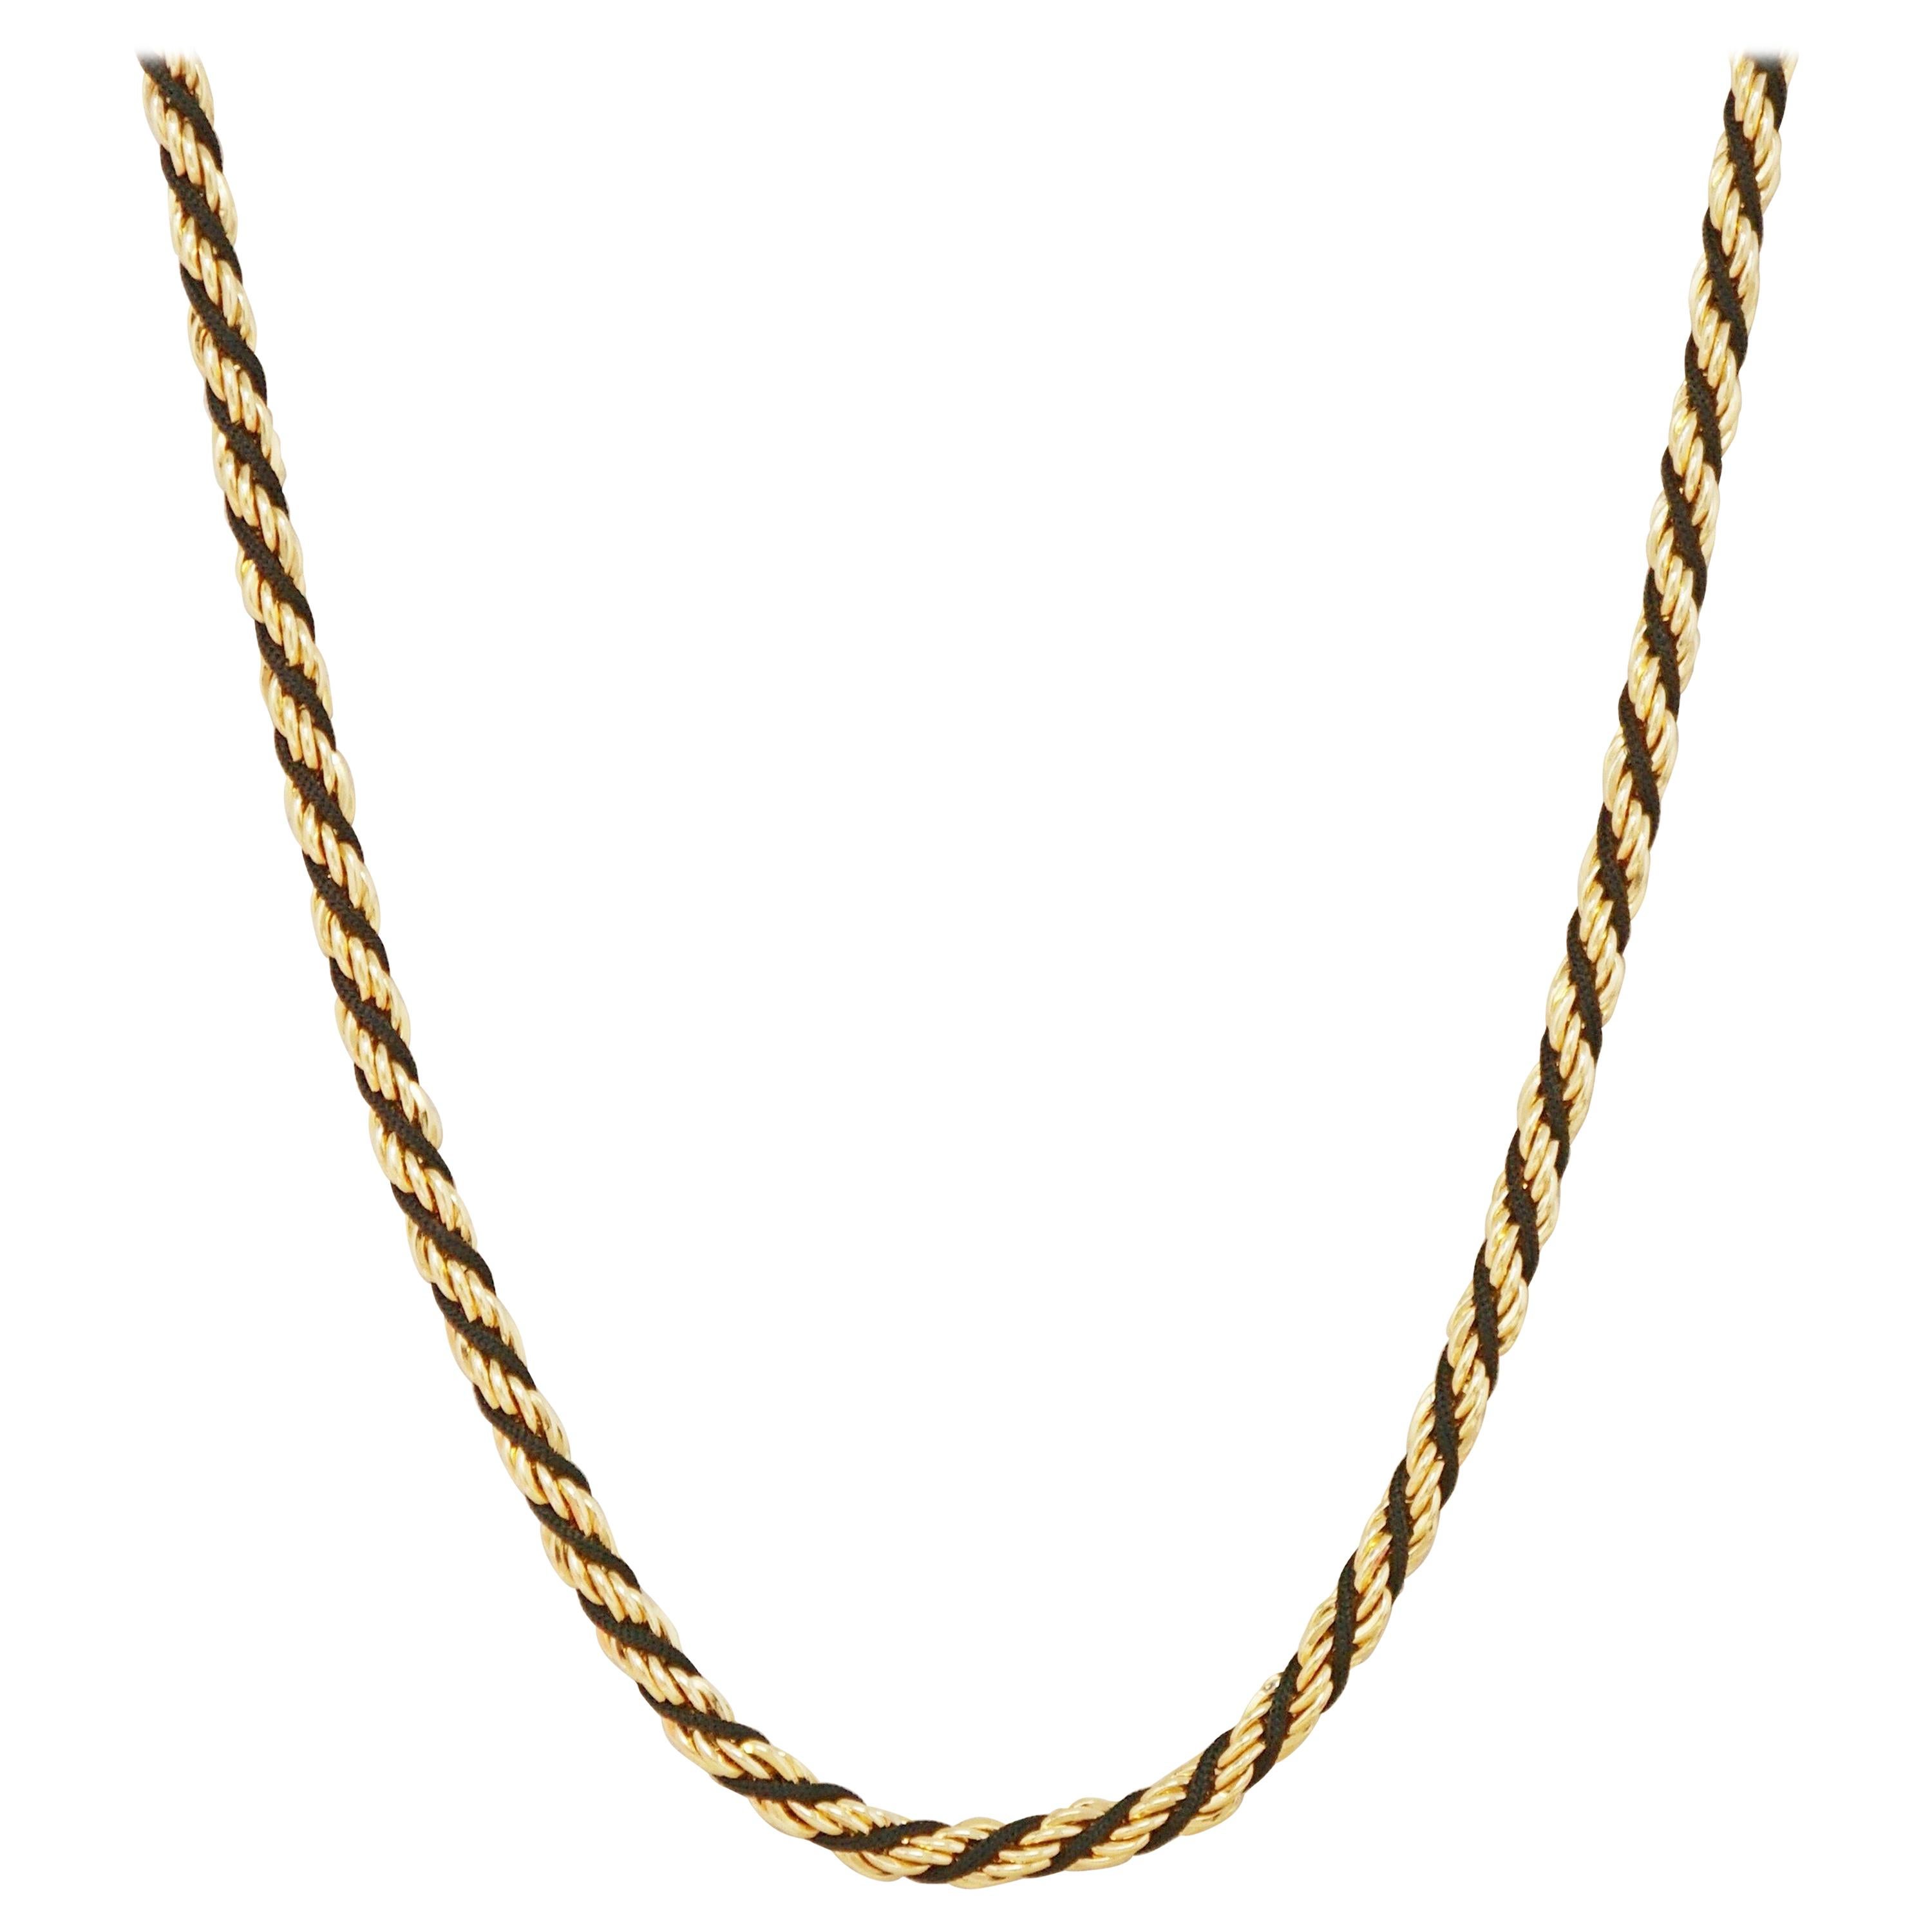 Vintage 24" Gilt & Black Cord Twisted Chain Necklace by Trifari, 1970s